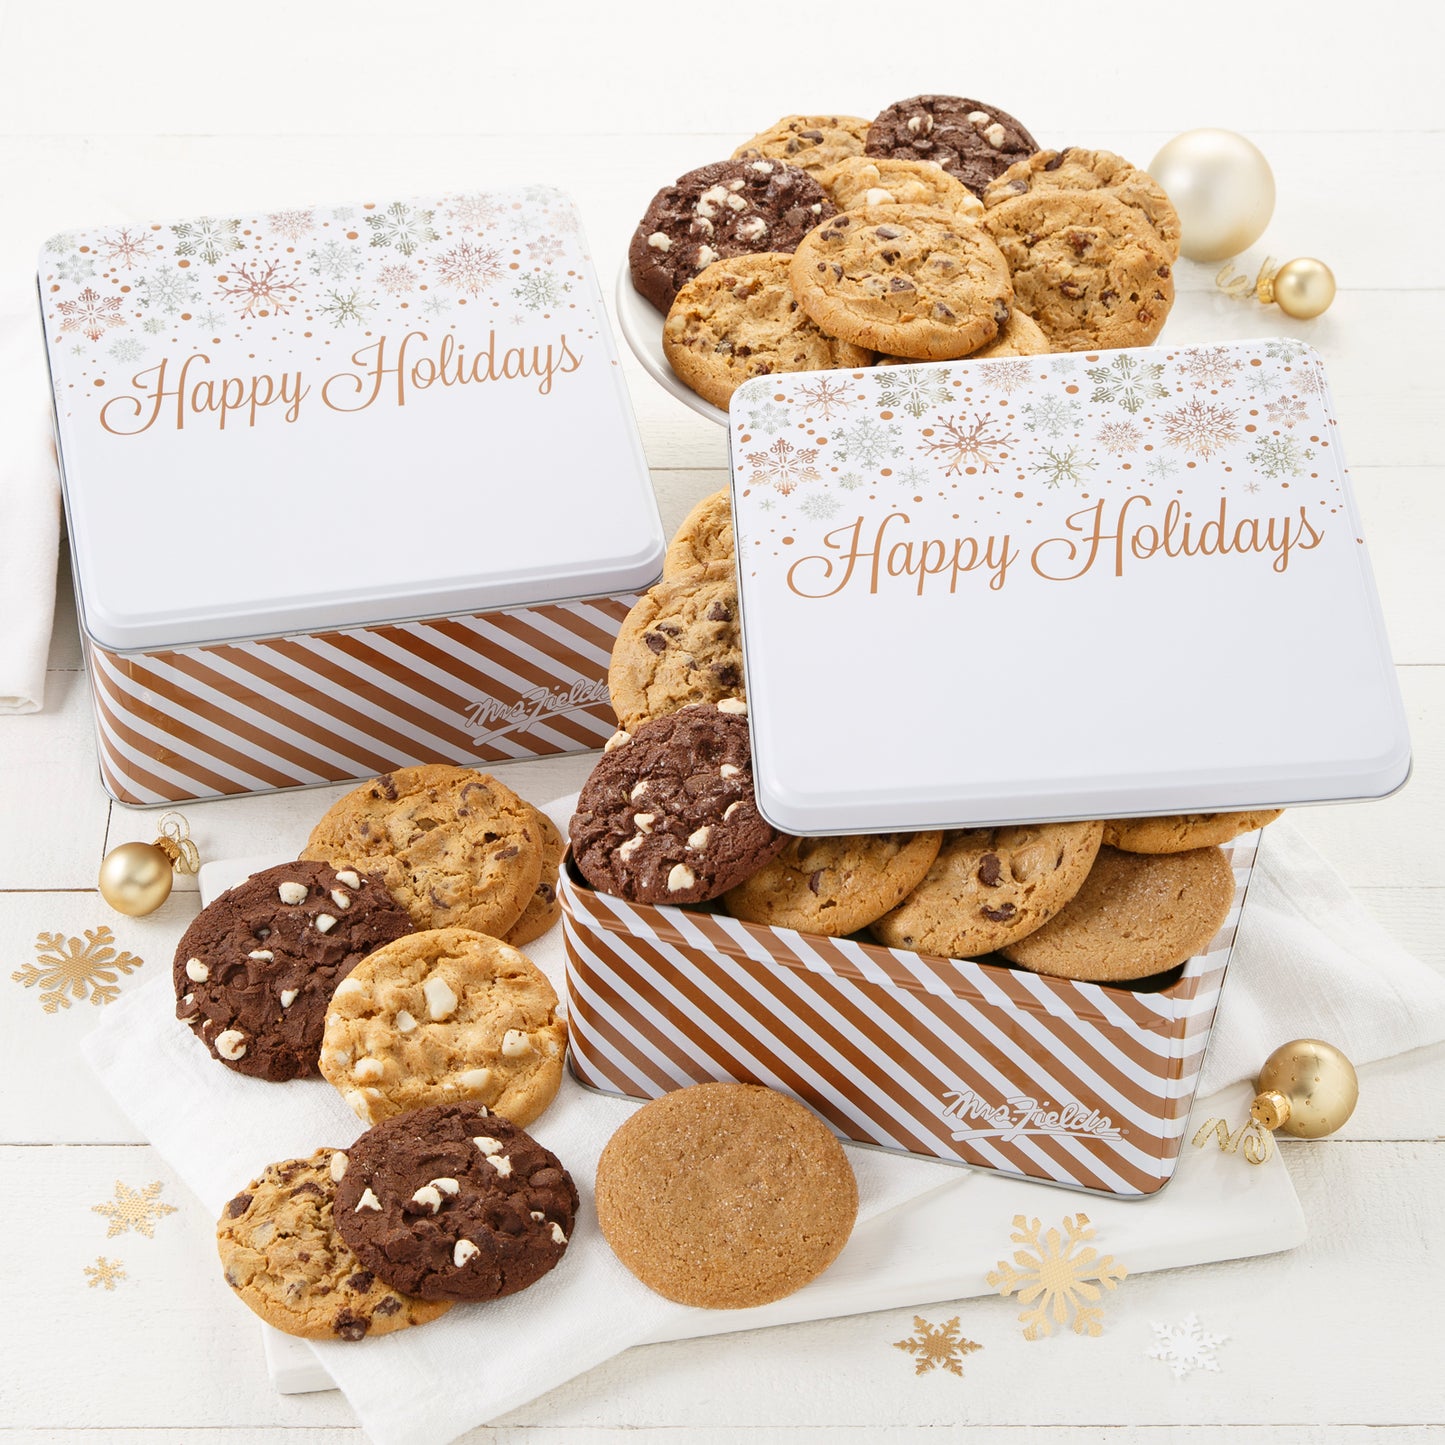 Two Happy Holidays gift tins decorated with silver and white snowflakes on a white top and filled with an assortment of original cookies.